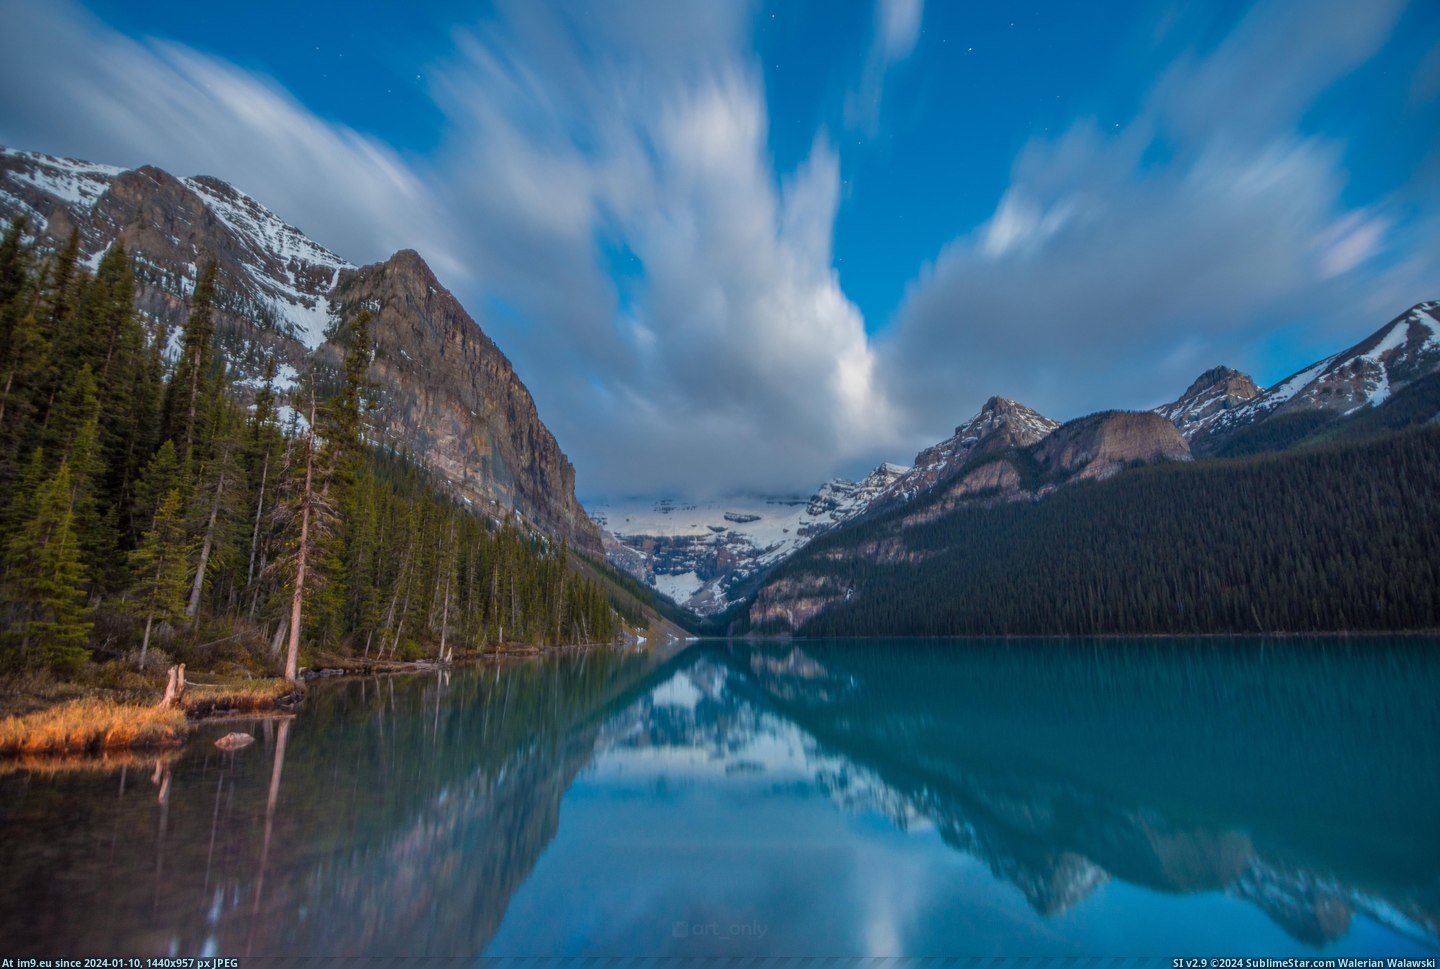 #Picture #Shot #Months #6000x4000 #Louise #Lake #Ago [Earthporn] I was looking for certain picture from few months ago and I came across this shot of Lake Louise [6000x4000] Pic. (Image of album My r/EARTHPORN favs))